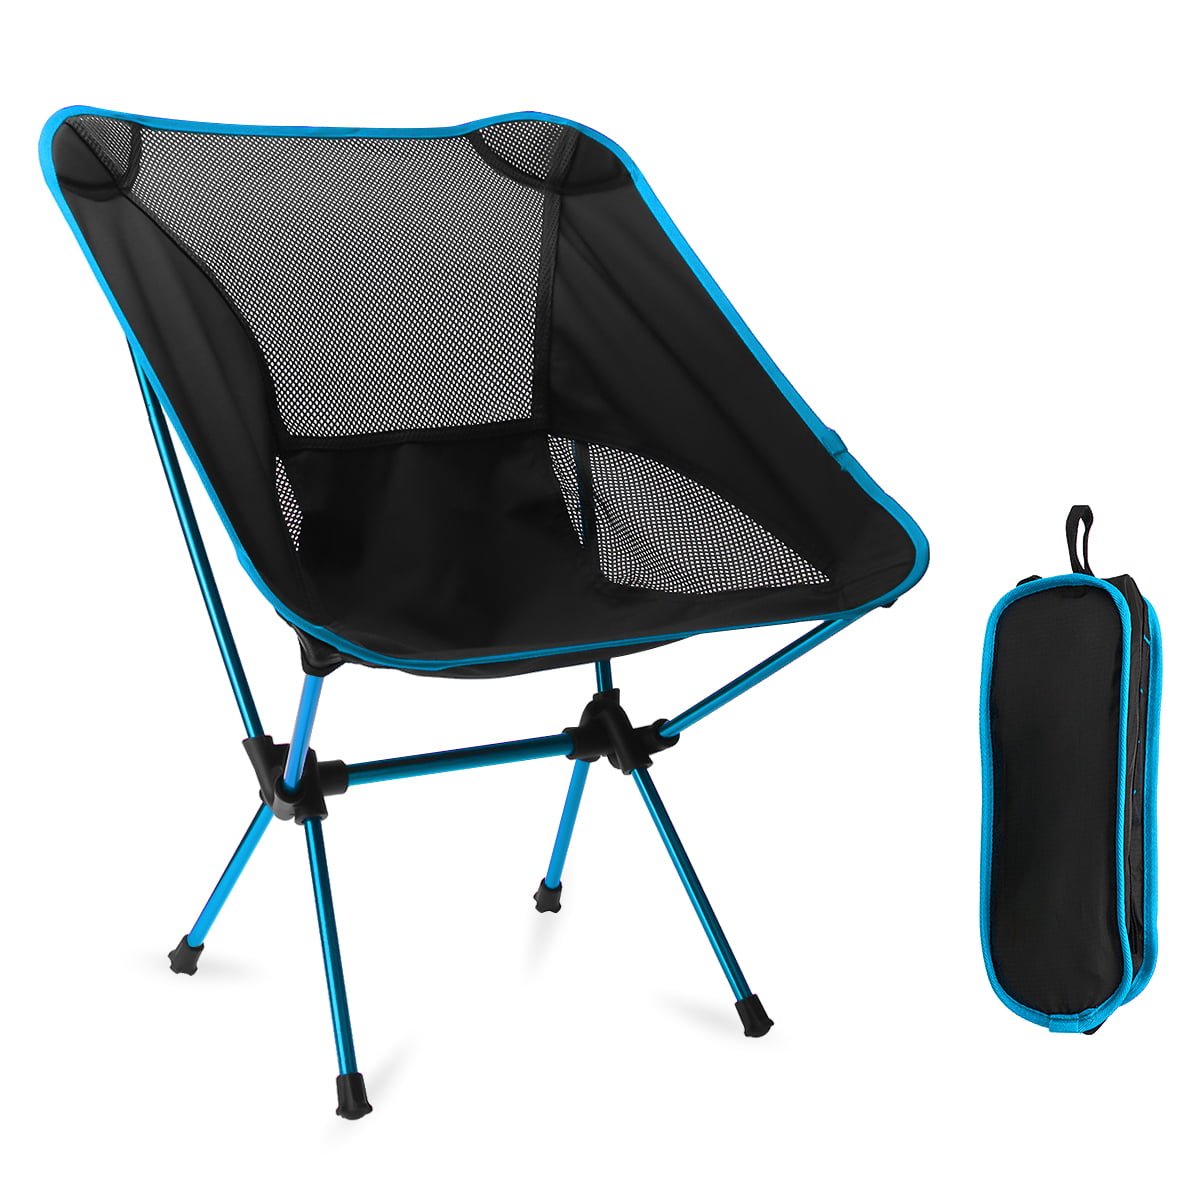 Azarxis Small Camping Folding Stool Mini Outdoor Collapsible Slacker Chairs Seat Portable Lightwight Folding Stool for Fishing Camp Traveling Hiking Beach Garden BBQ with Carry Bag